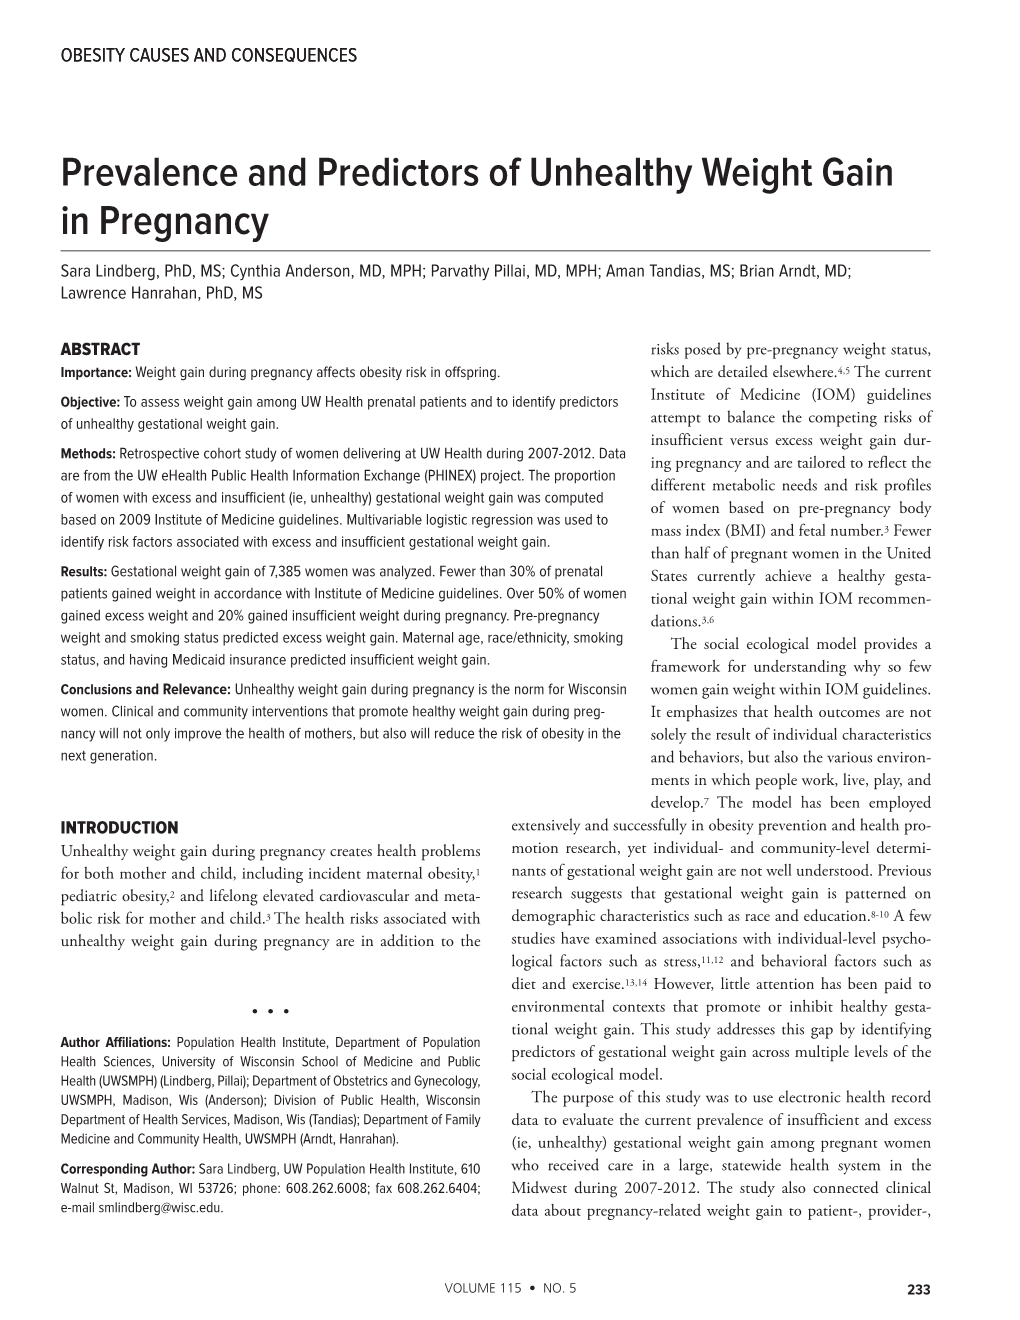 Prevalence and Predictors of Unhealthy Weight Gain in Pregnancy